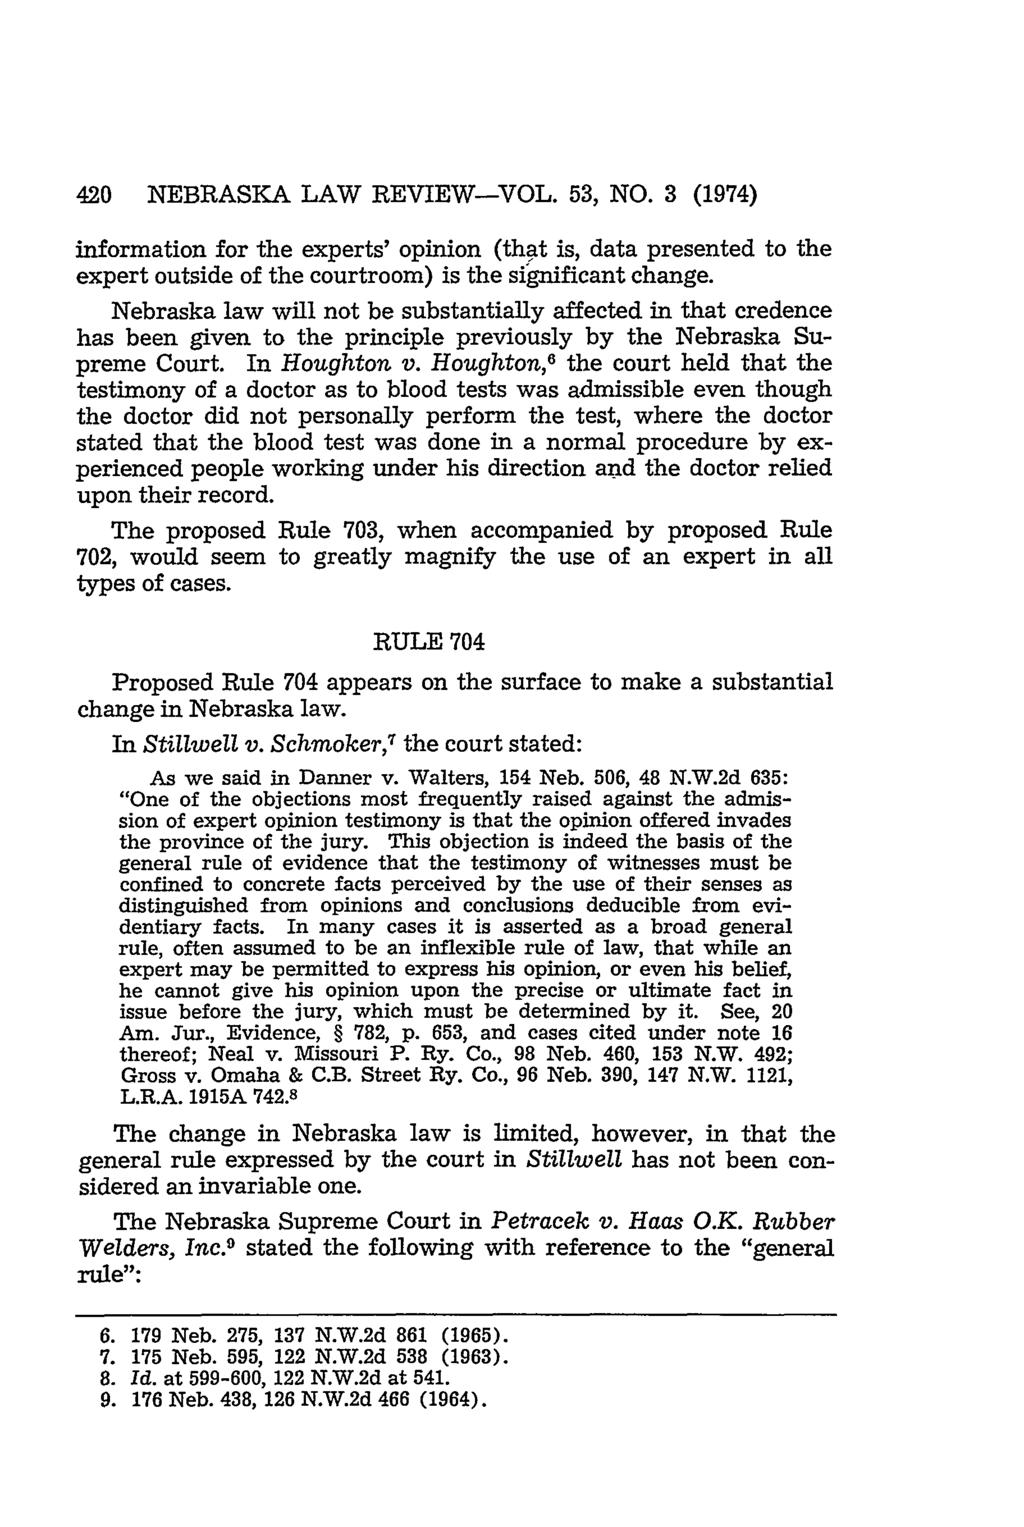 420 NEBRASKA LAW REVIEW-VOL. 53, NO. 3 (1974) information for the experts' opinion (that is, data presented to the expert outside of the courtroom) is the significant change.